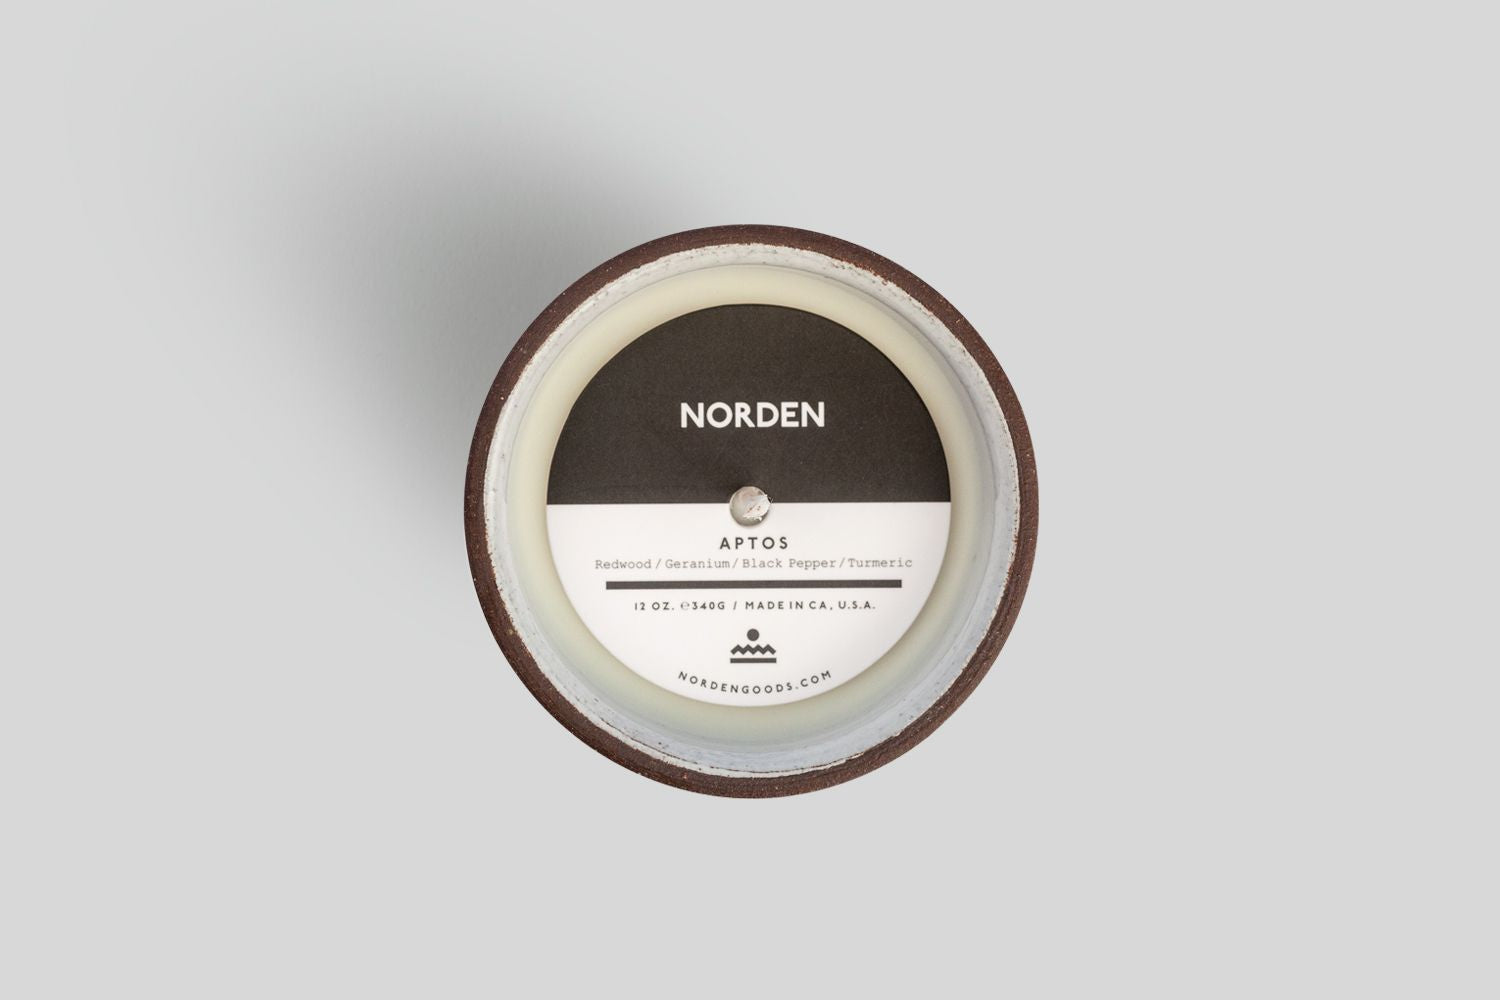 NORDEN GOODS Made in California Handthrown Ceramic Coconut and Apricot Wax Sustainable Organic Candle Geranium and Tumeric Aptos Scent